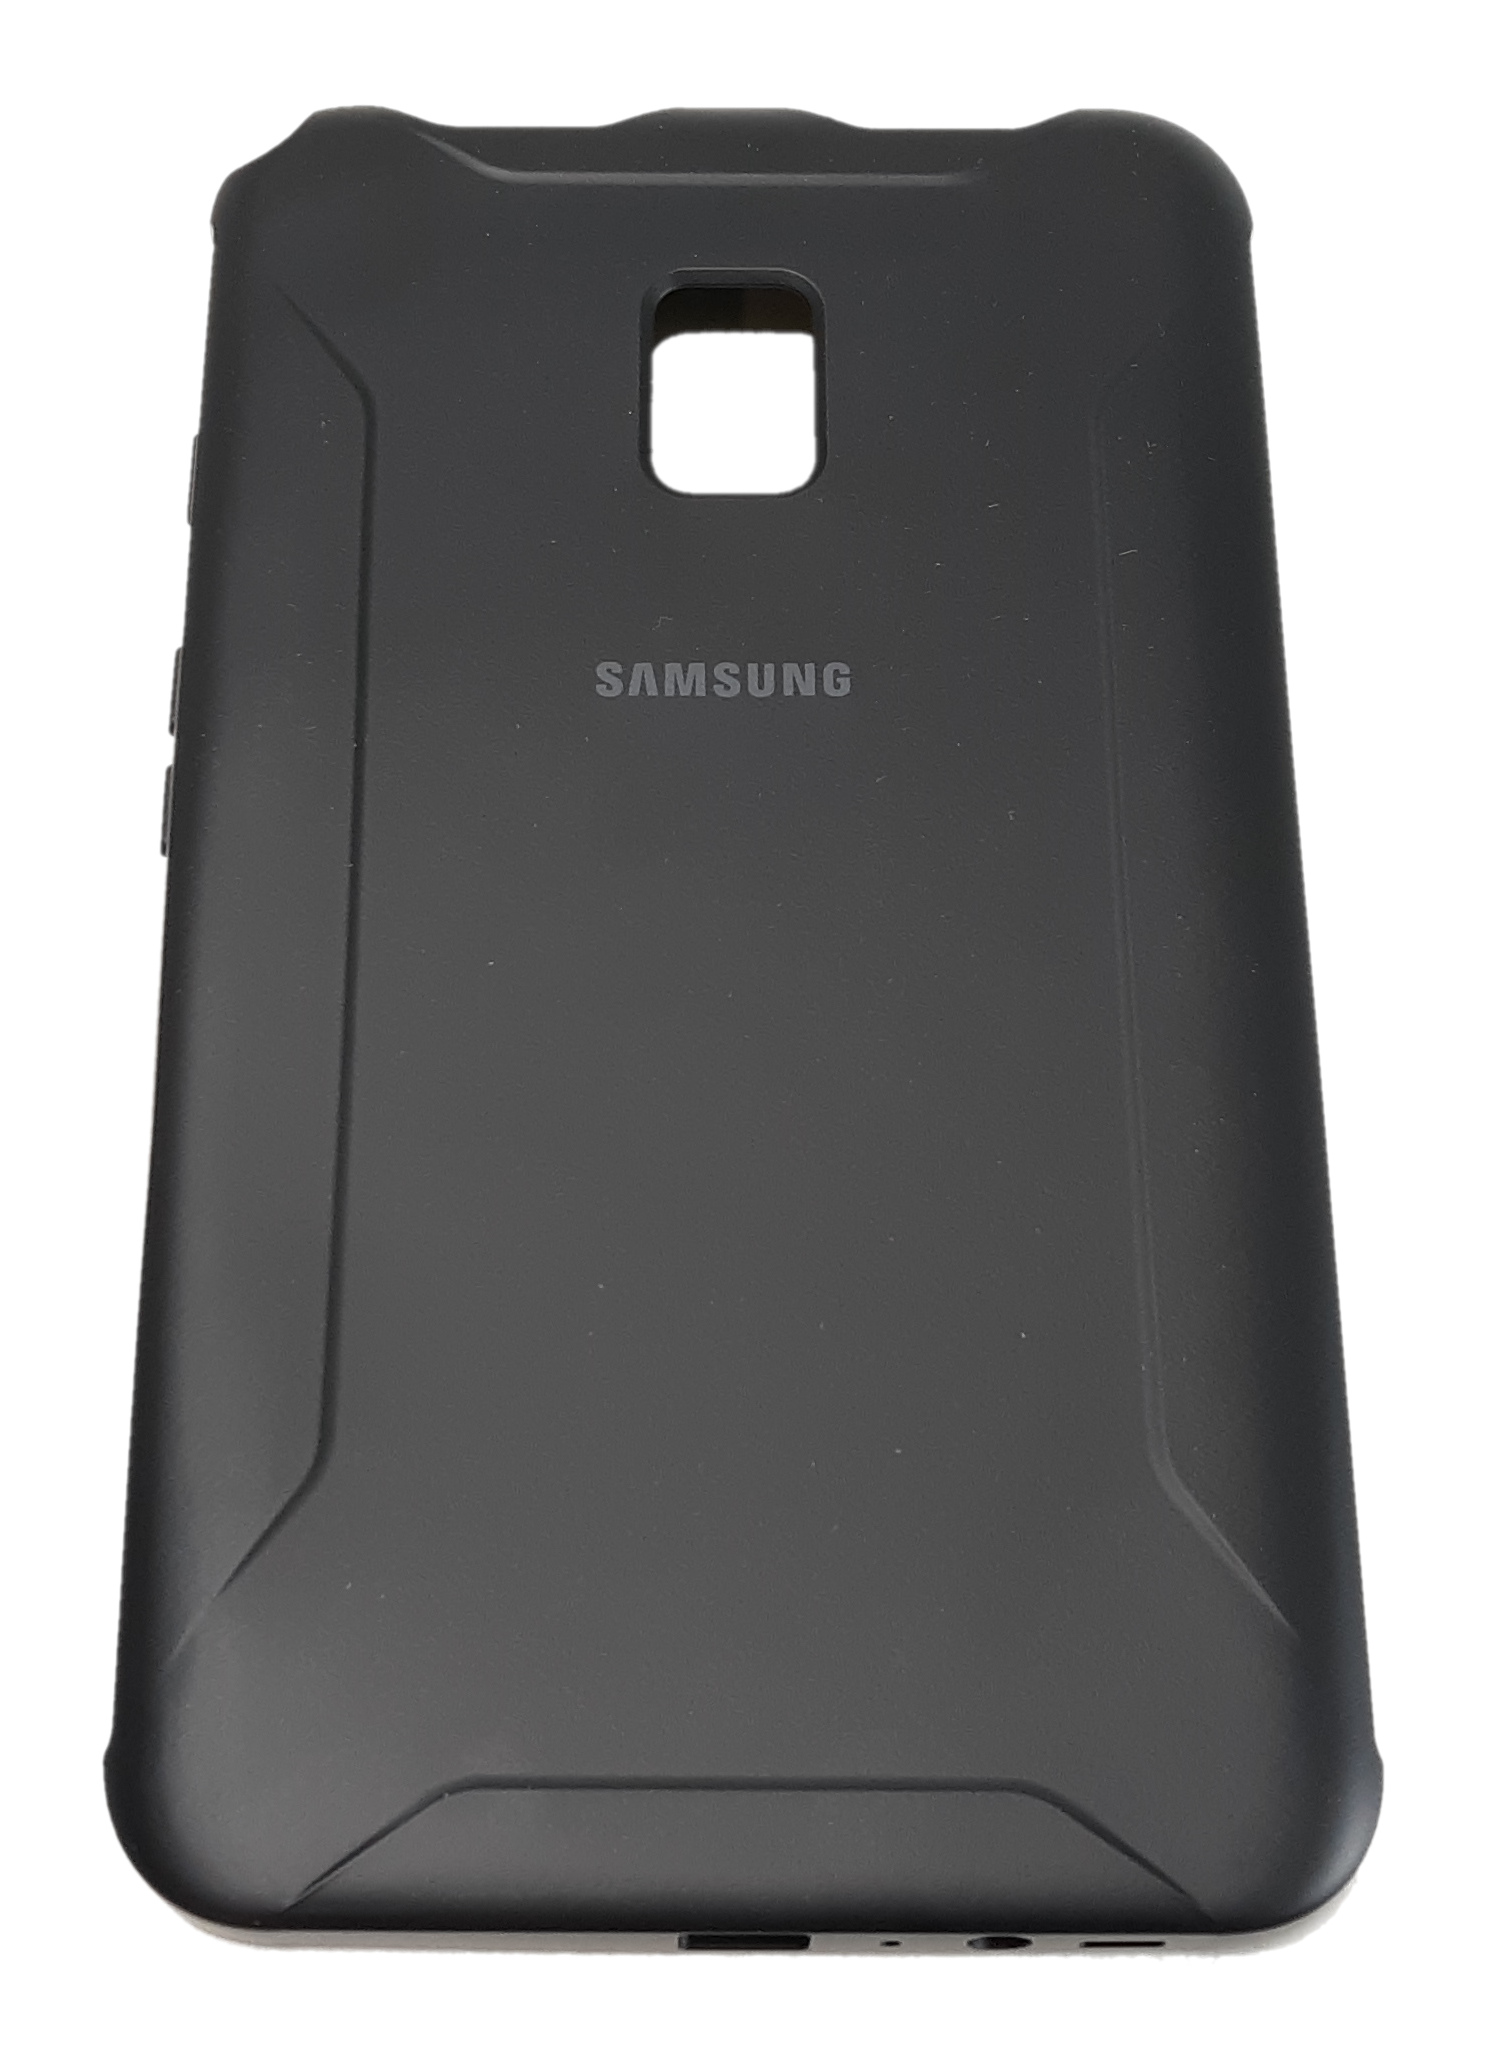 Samsung Galaxy Tab Active 2 Protective Cover Case Original Authentic (Case only)